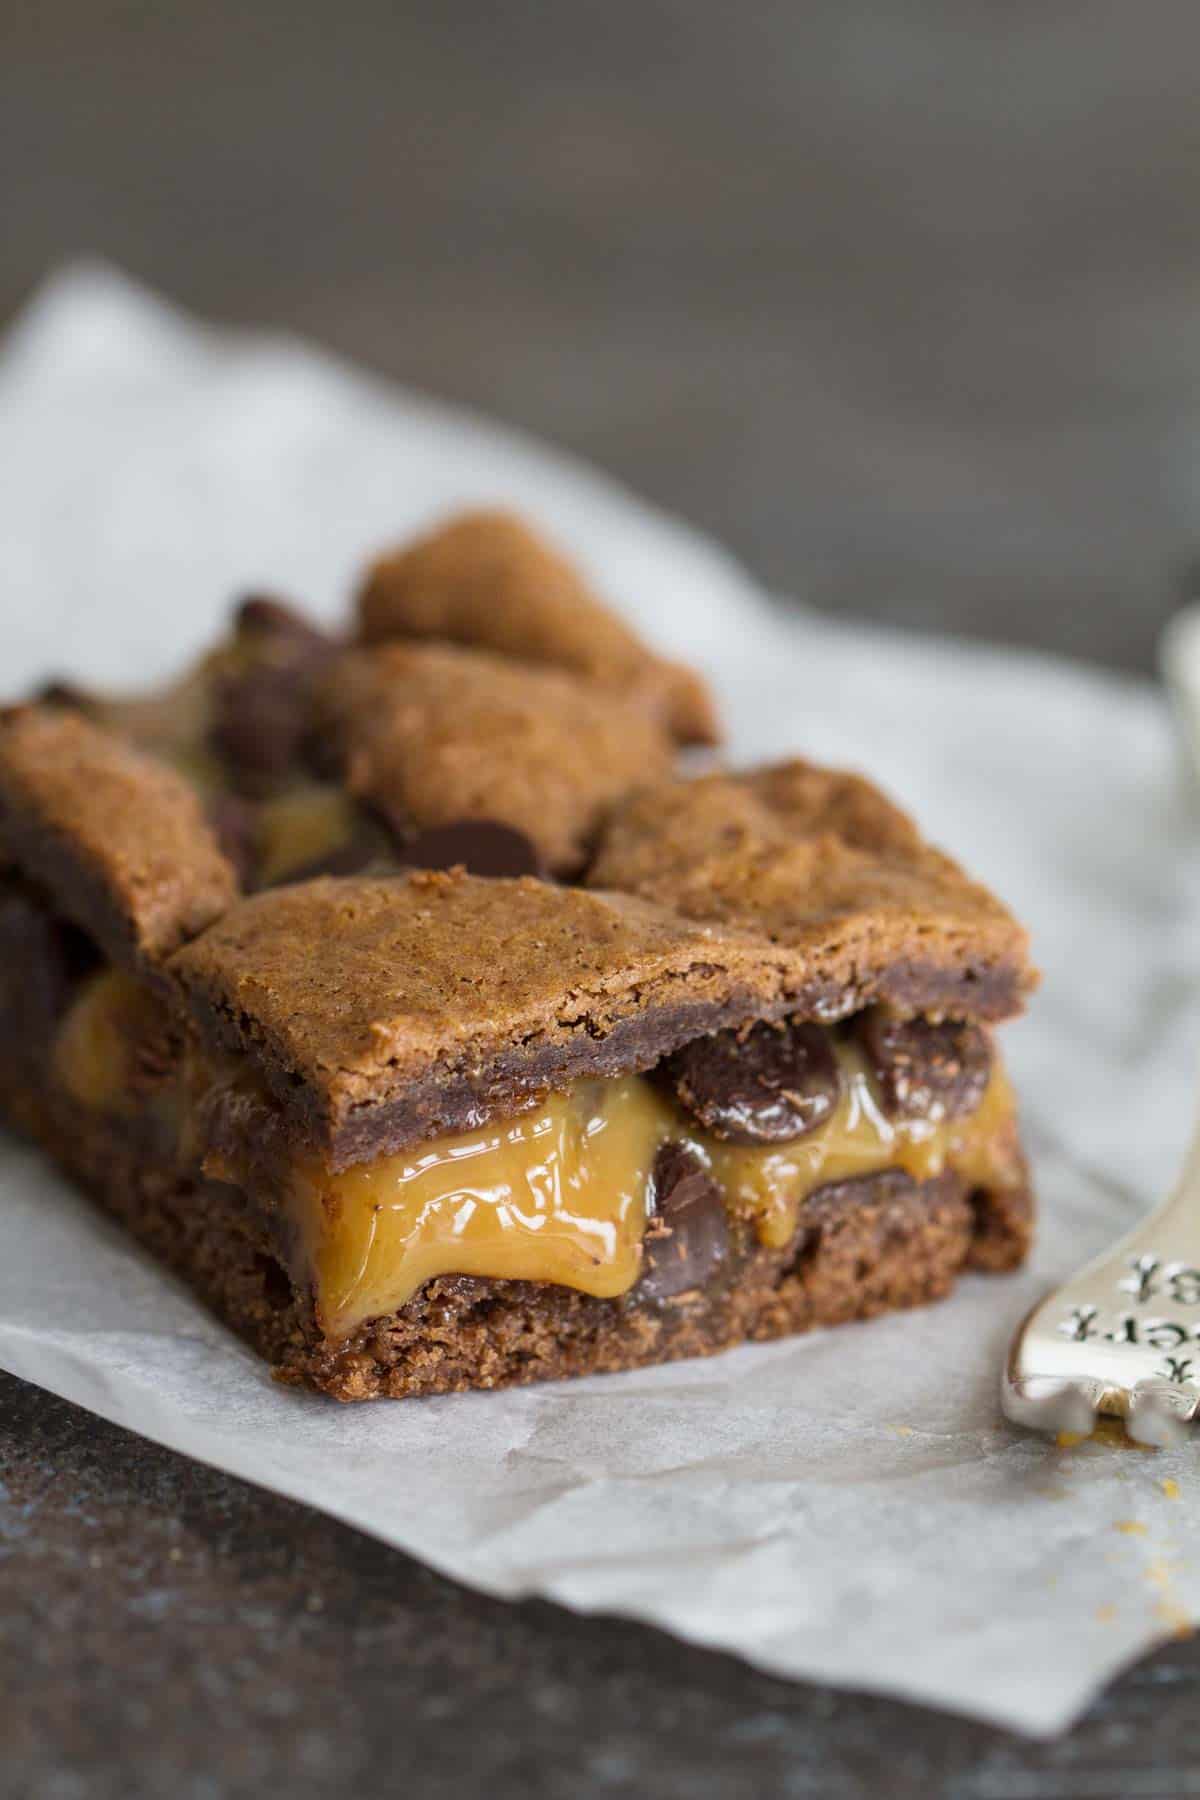 Caramel brownie with caramel oozing out.